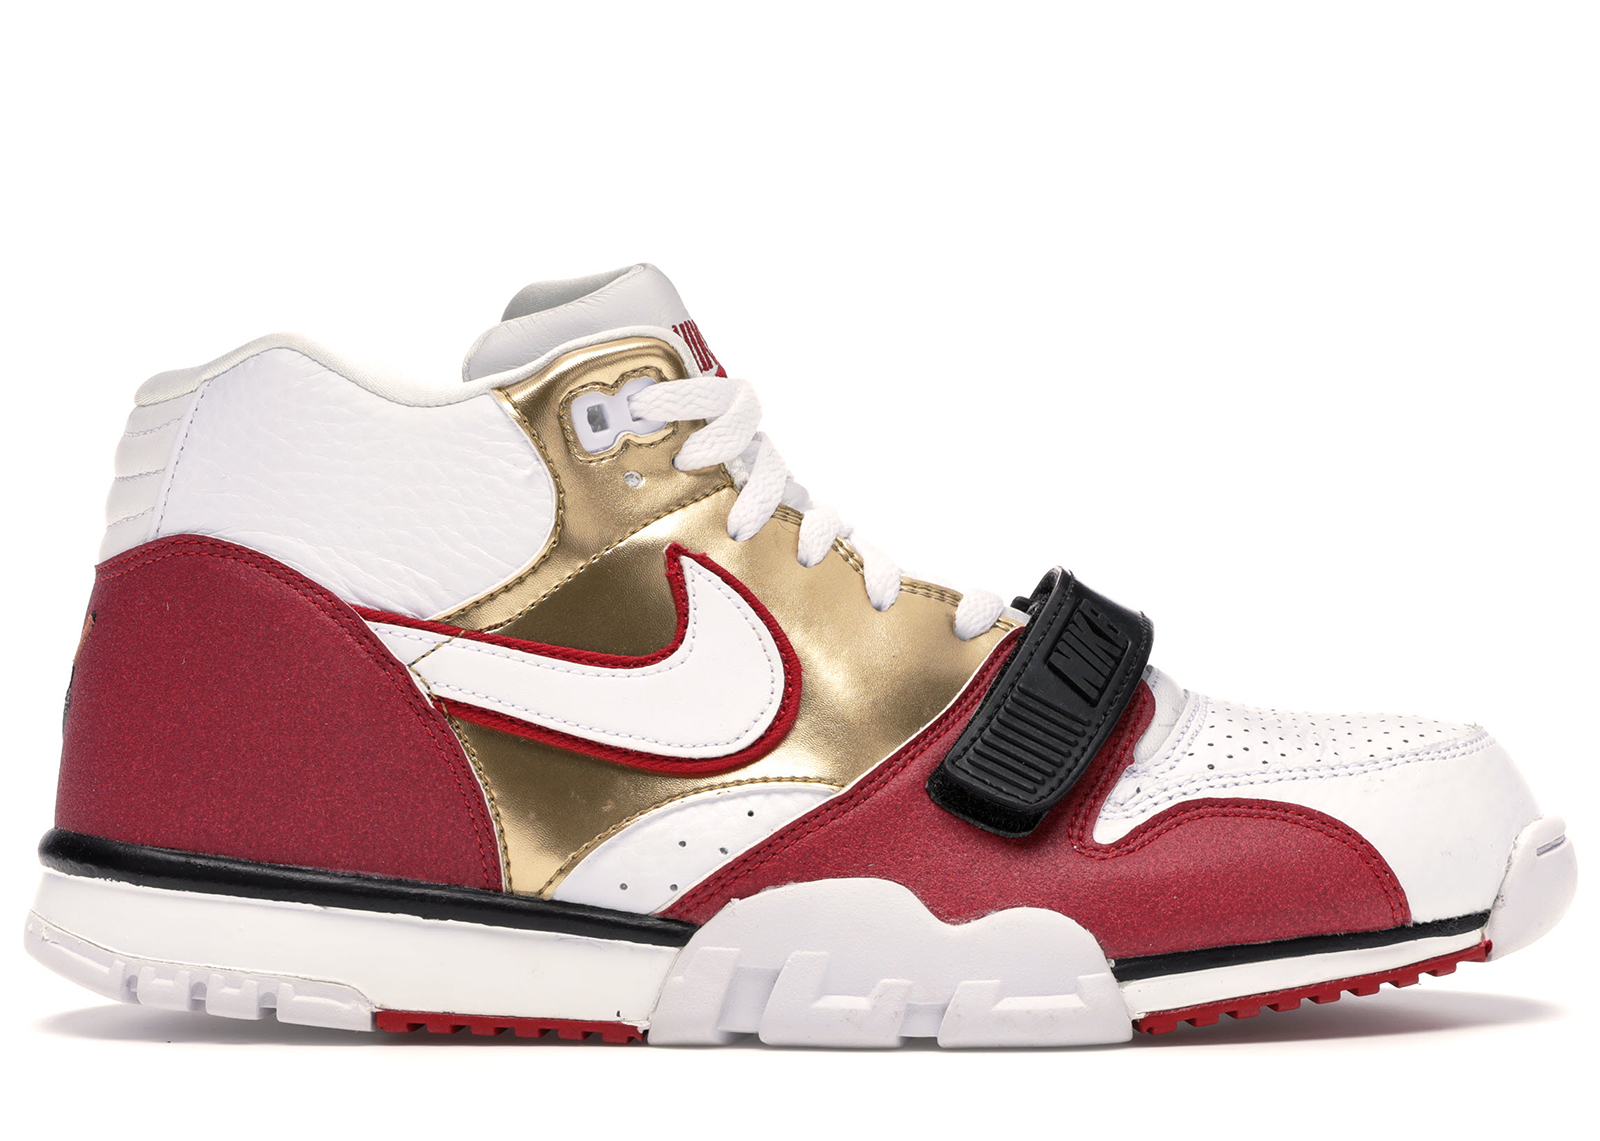 Nike Air Trainer 1 Jerry Rice - 607081-101